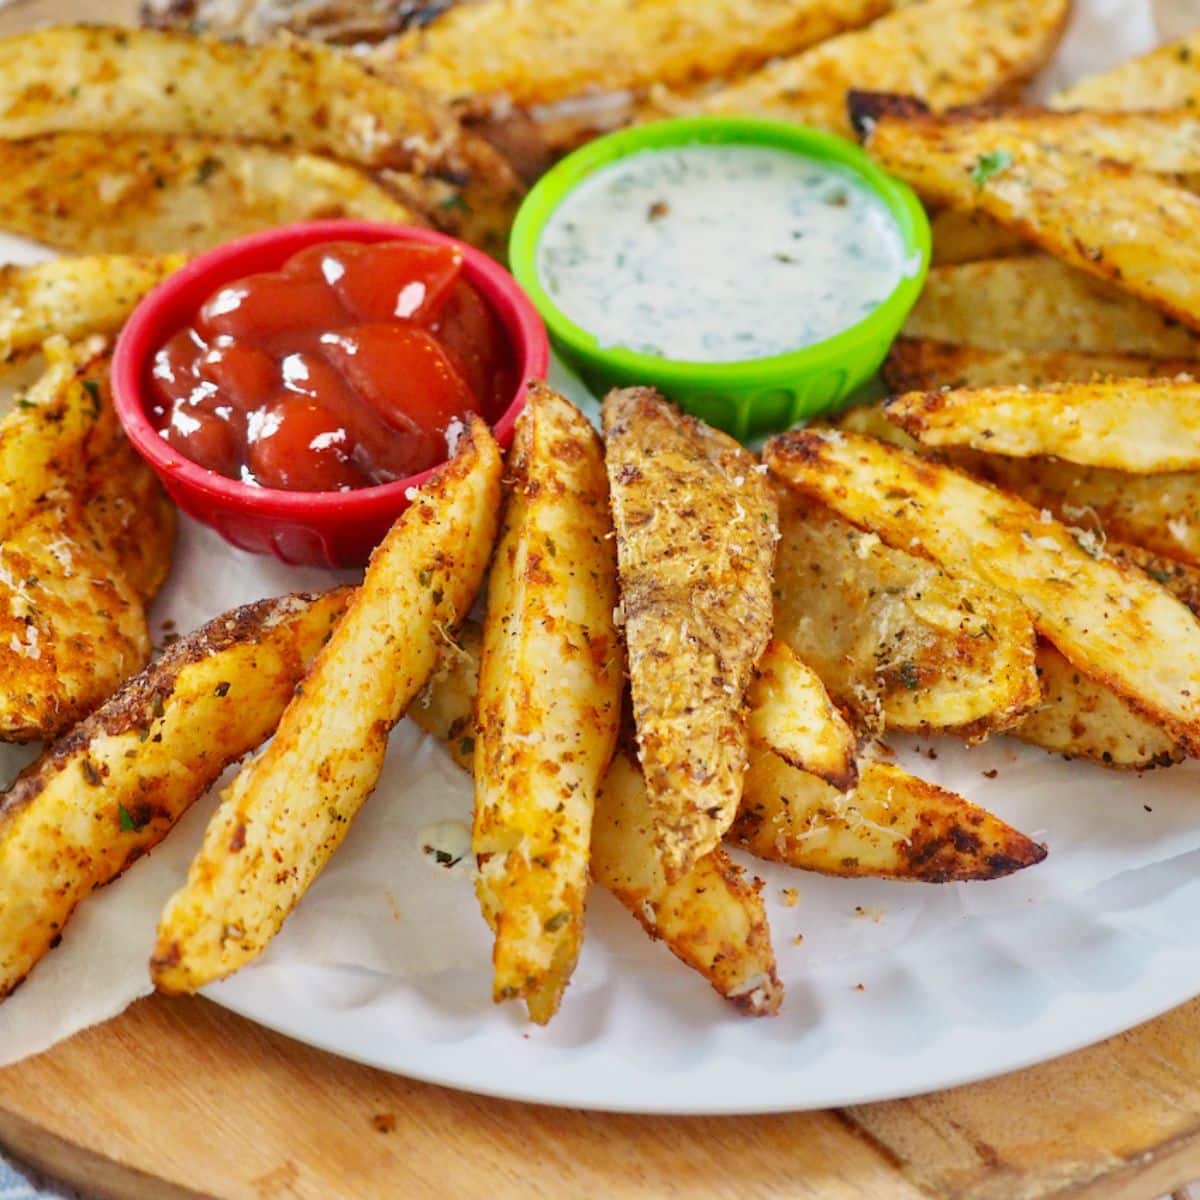 Air Fryer Steak Fries with ketchup and ranch dressing for dipping.